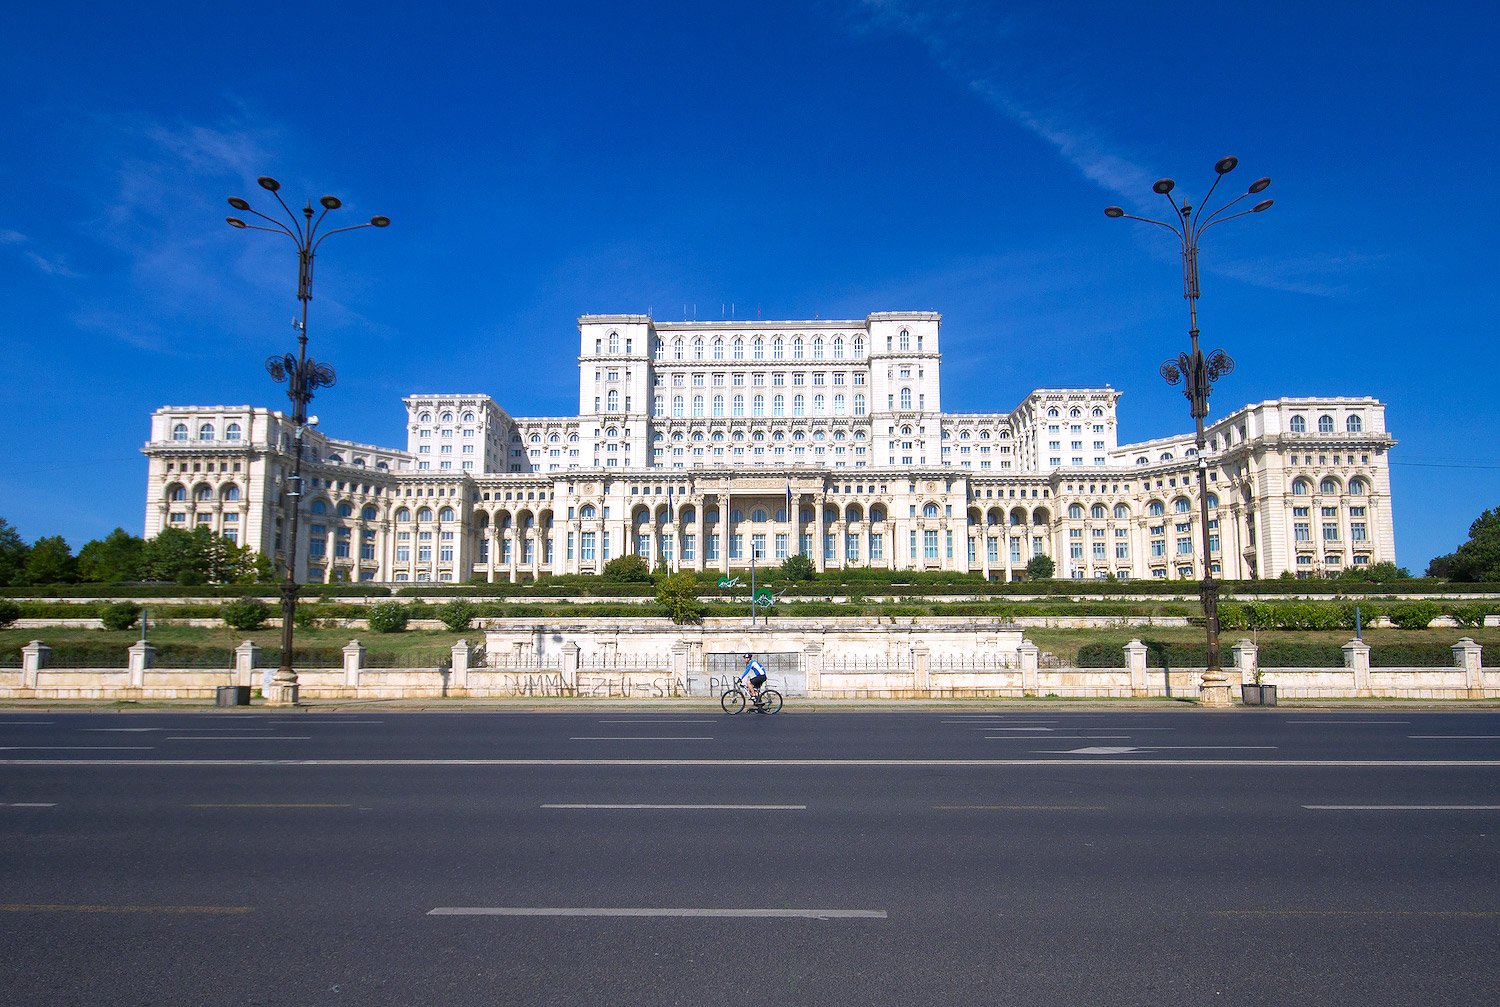 From gossiping grandmas to effortless fashionistas, discover the people of Bucharest 